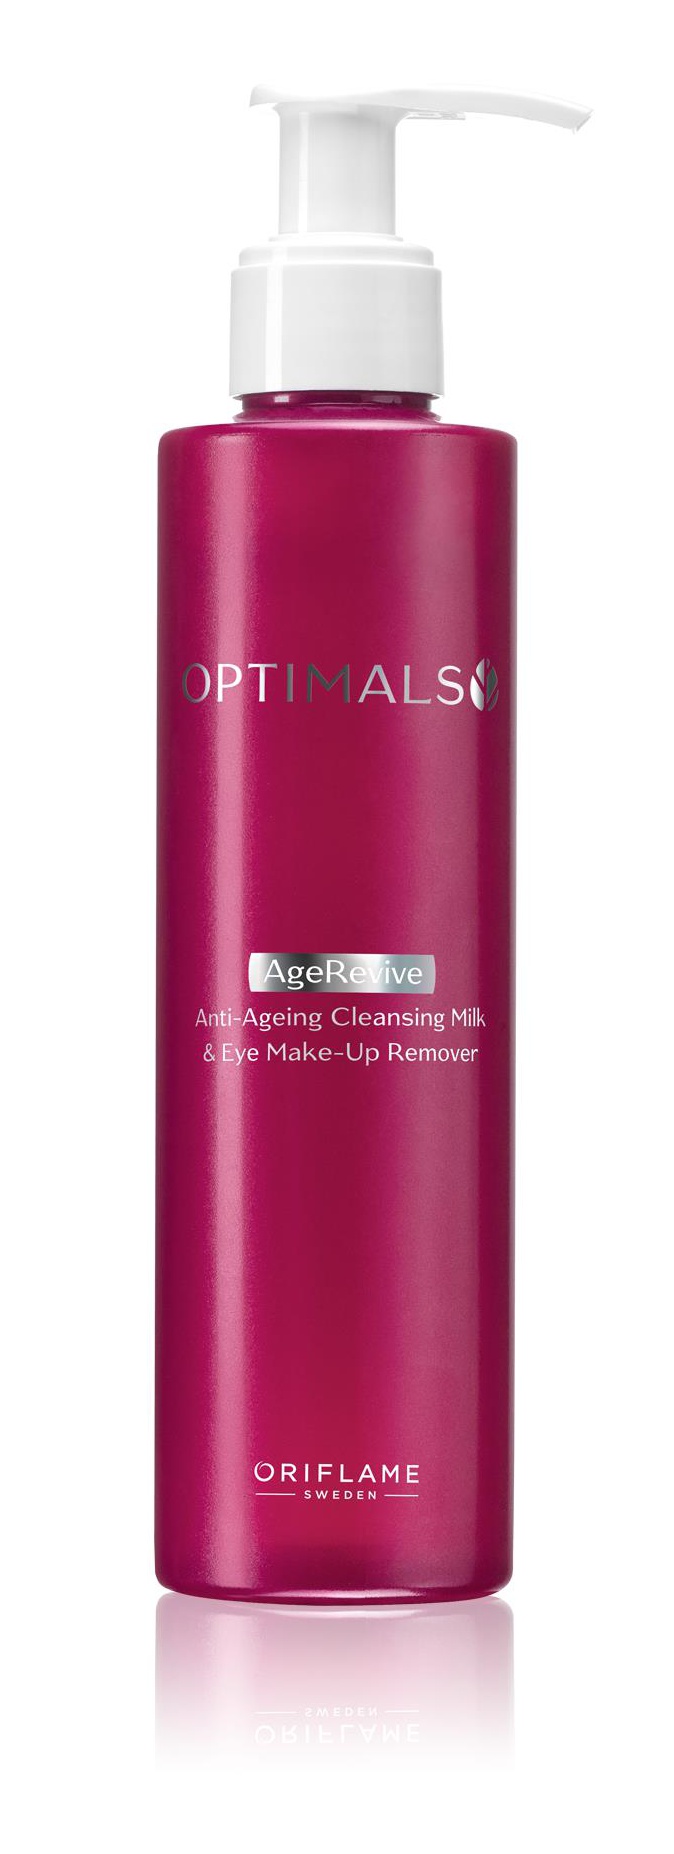 Oriflame  Sweden Optimals Age Revive Anti-Ageing Cleansing Milk & Eye Make-Up Remover